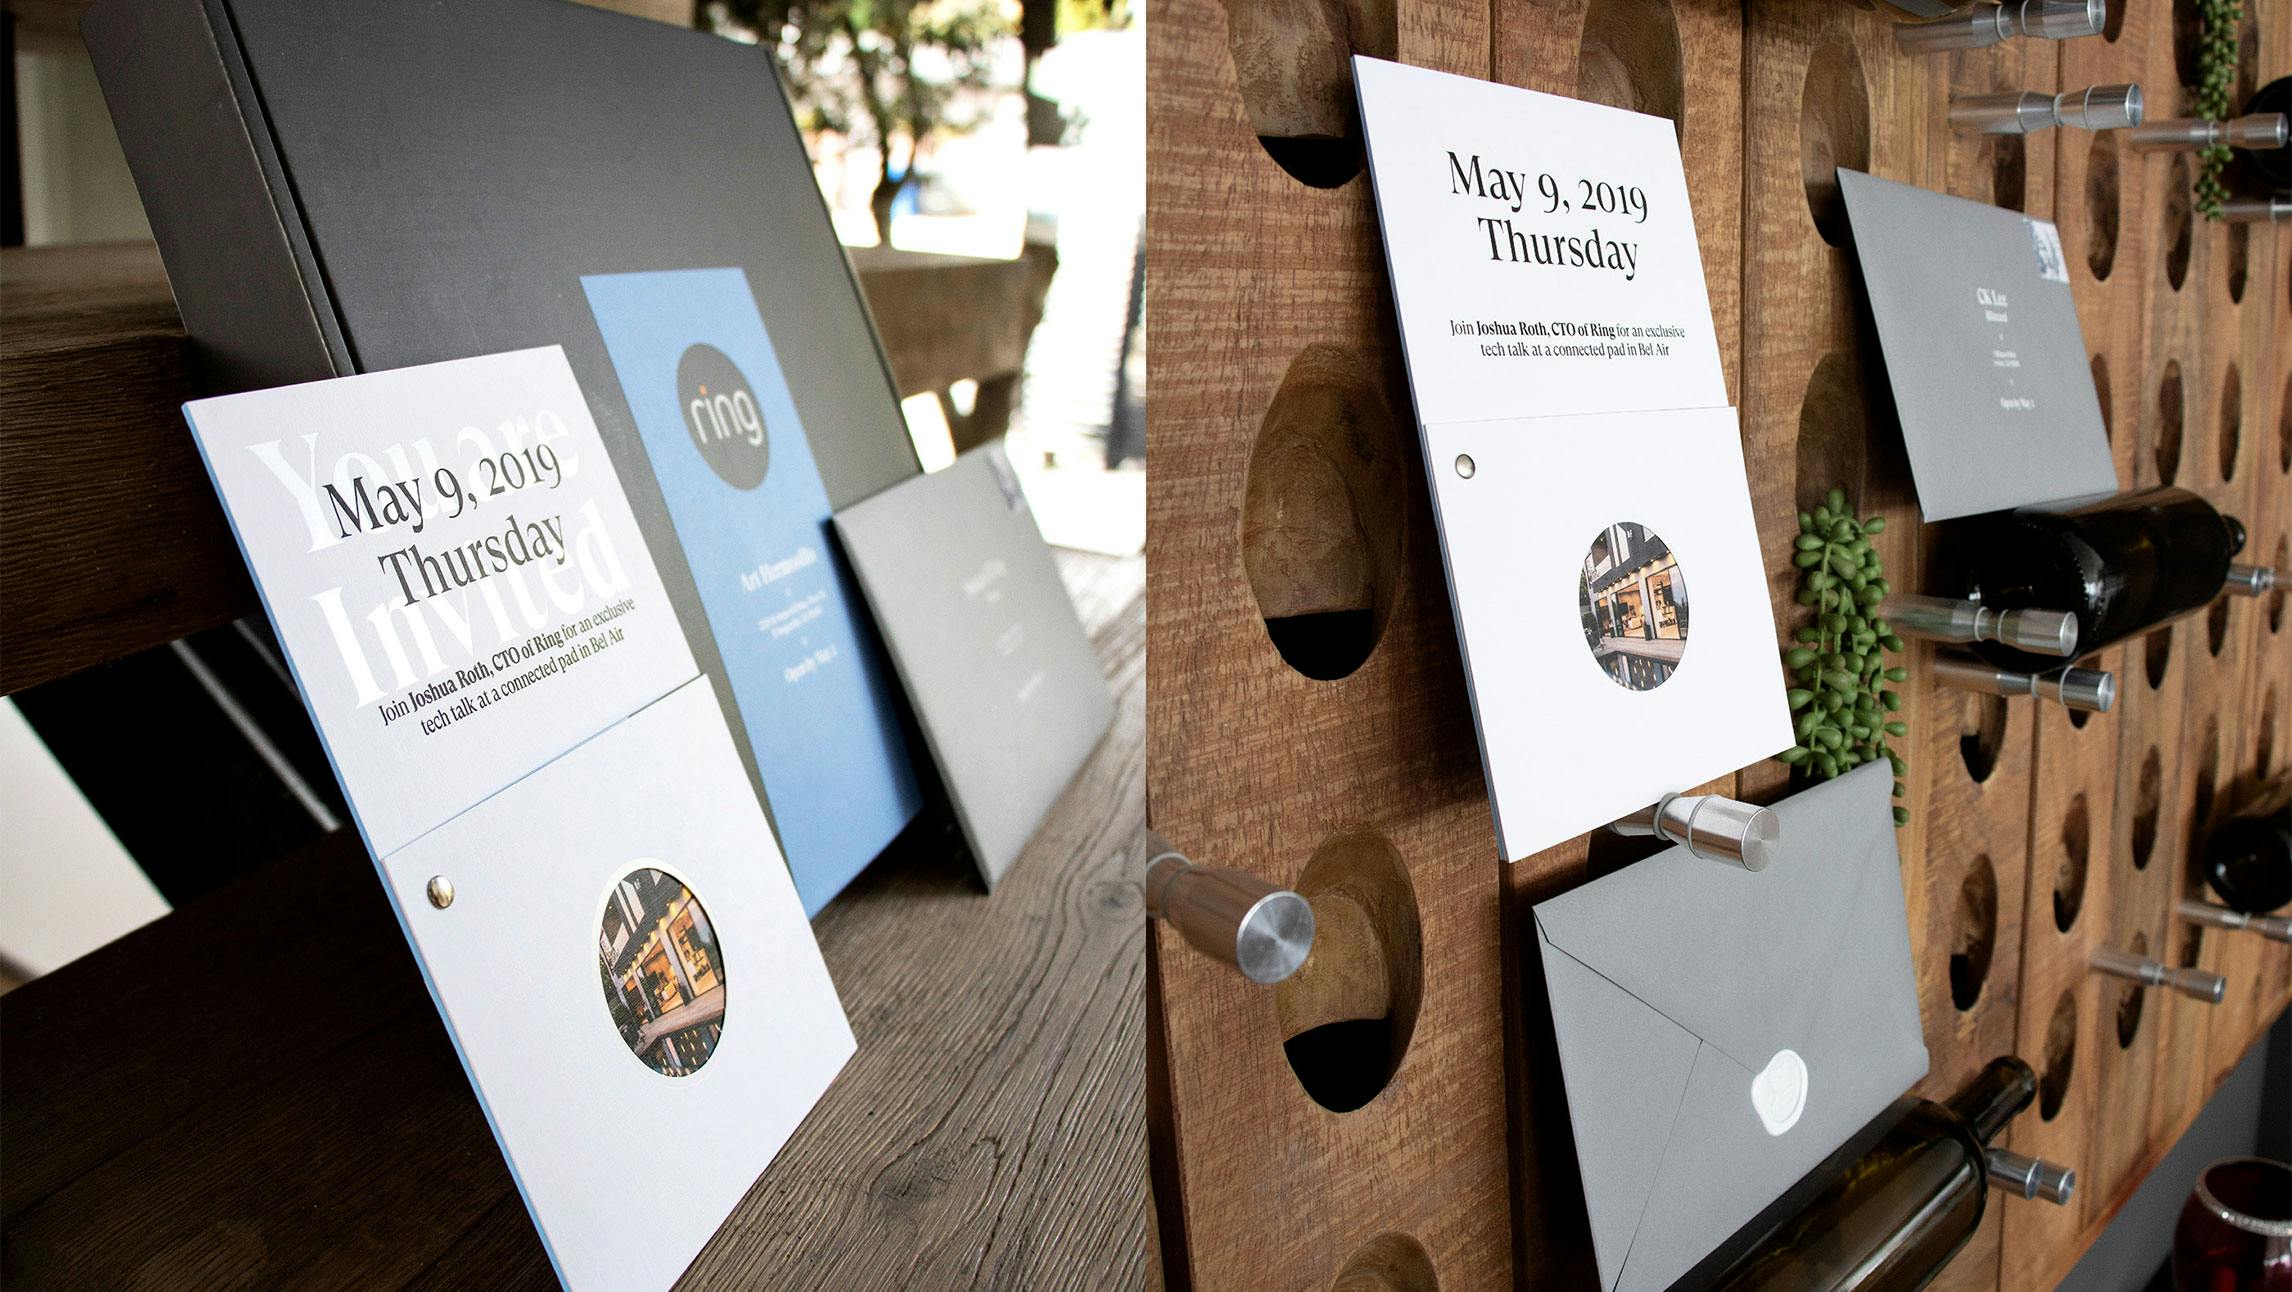 A split screen image of two photographs- on the left the Datadog x Ring invitation is placed on a dark wooden surface and on the right the Datadog x Ring invitation is mounted on a wooden wall.